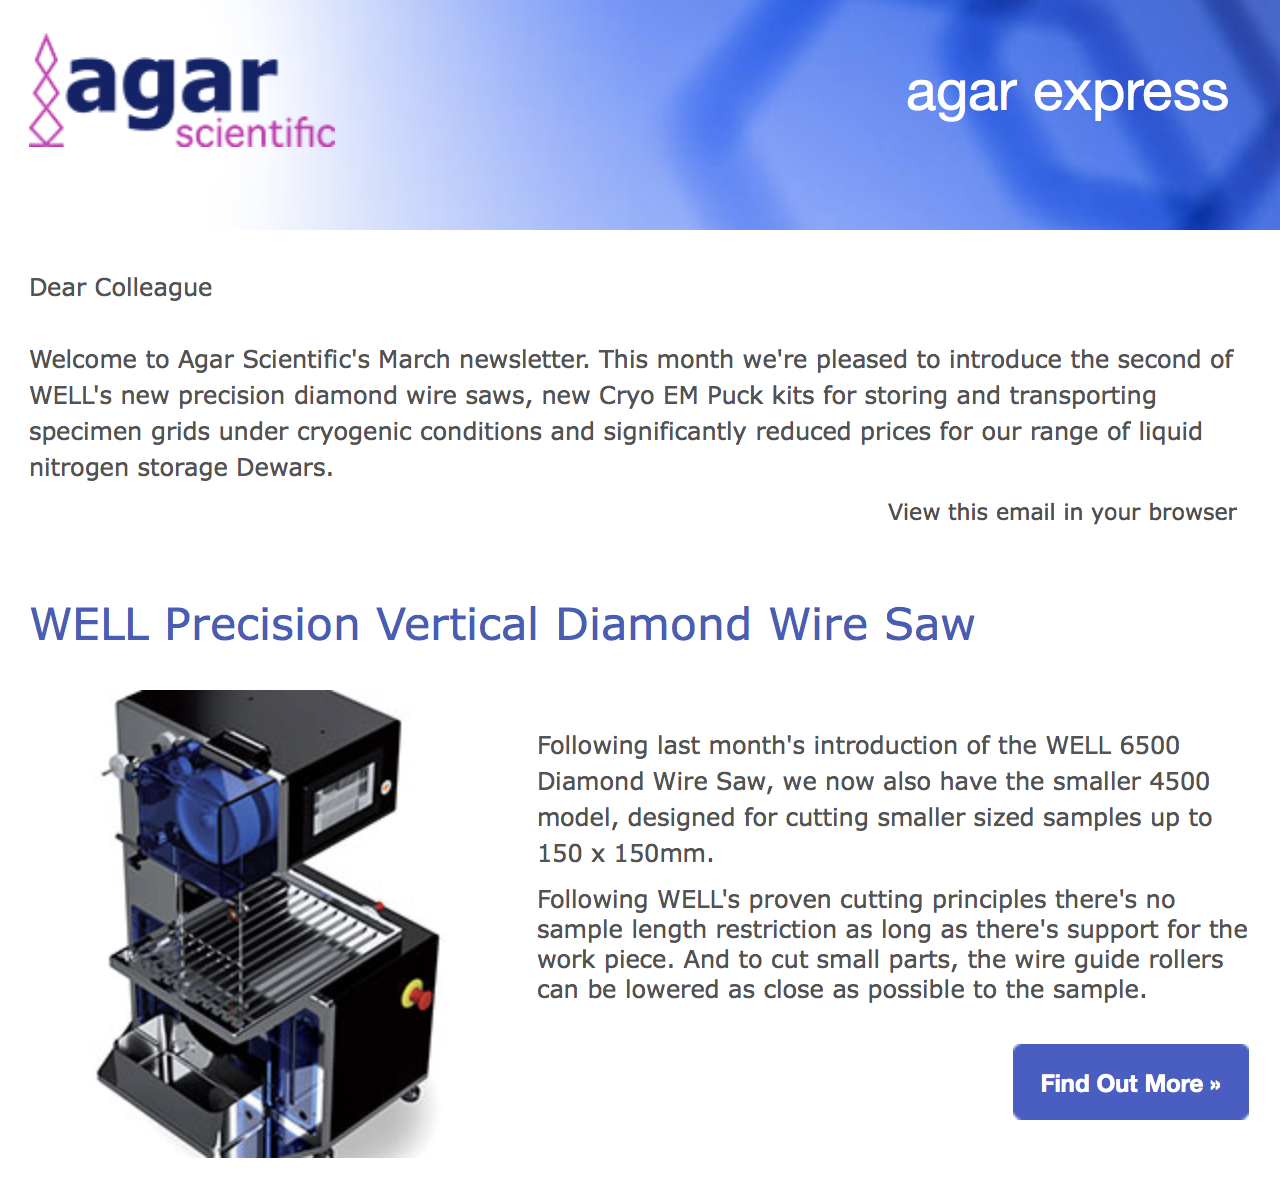 Agar Express March 2018 - a new diamond wire saw, Cryo-EM pucks, Dewars prices reduced and more...